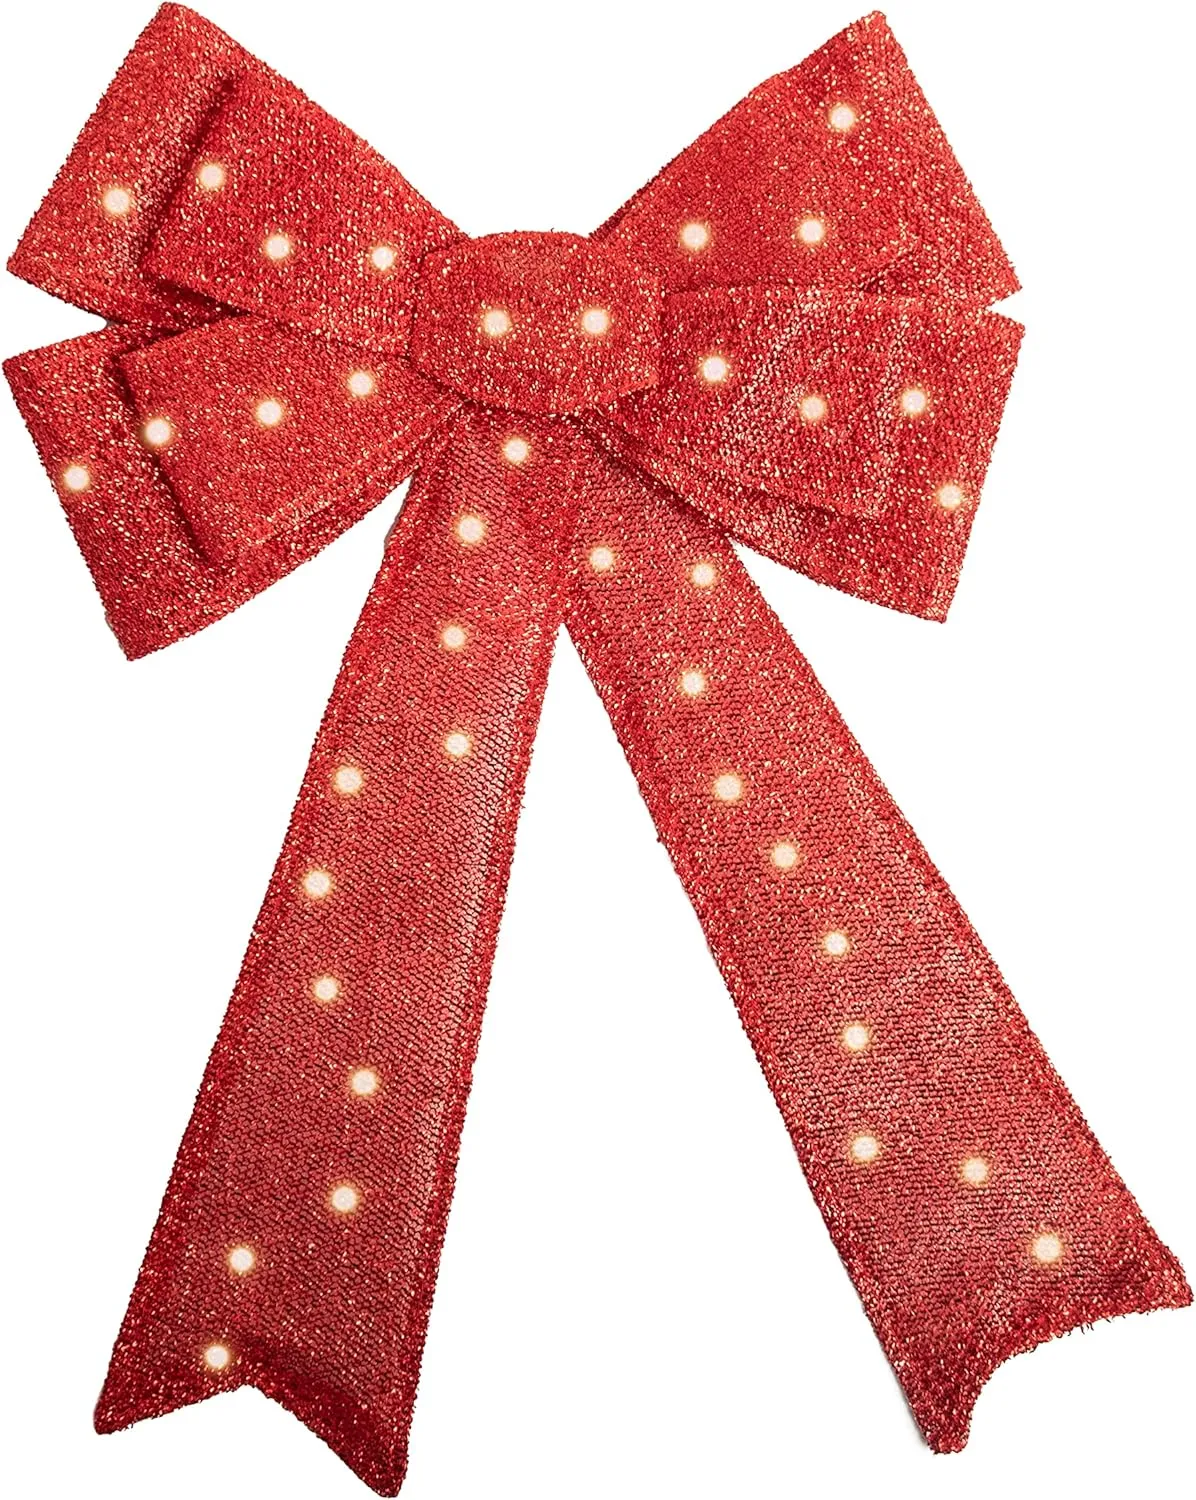 RELSY Pre-lit Christmas Bow